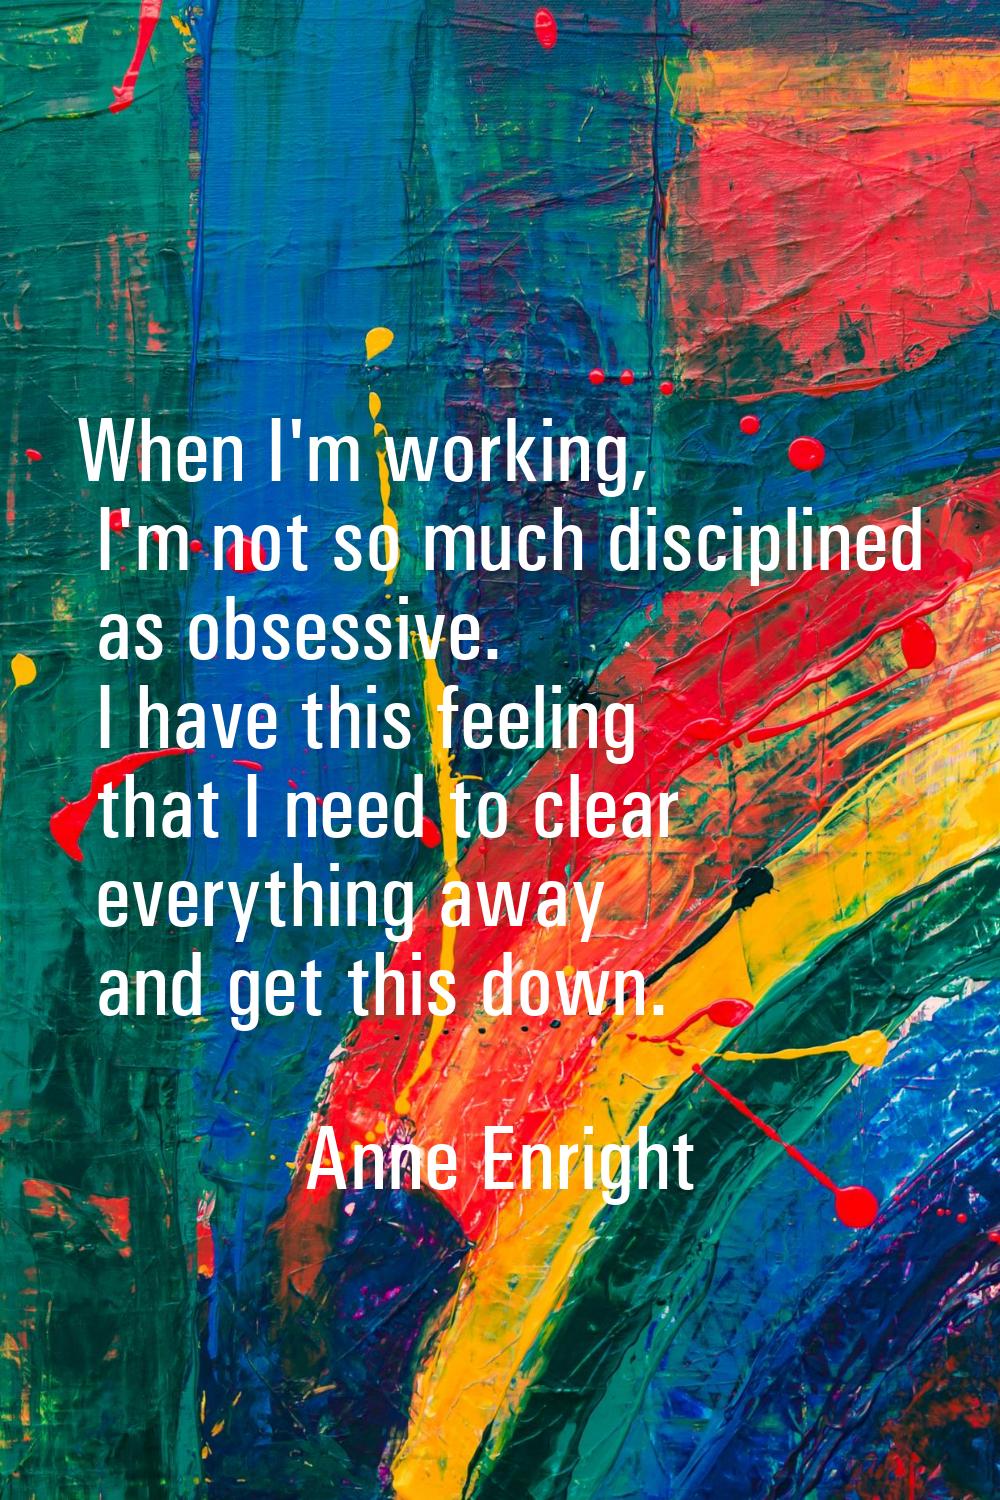 When I'm working, I'm not so much disciplined as obsessive. I have this feeling that I need to clea